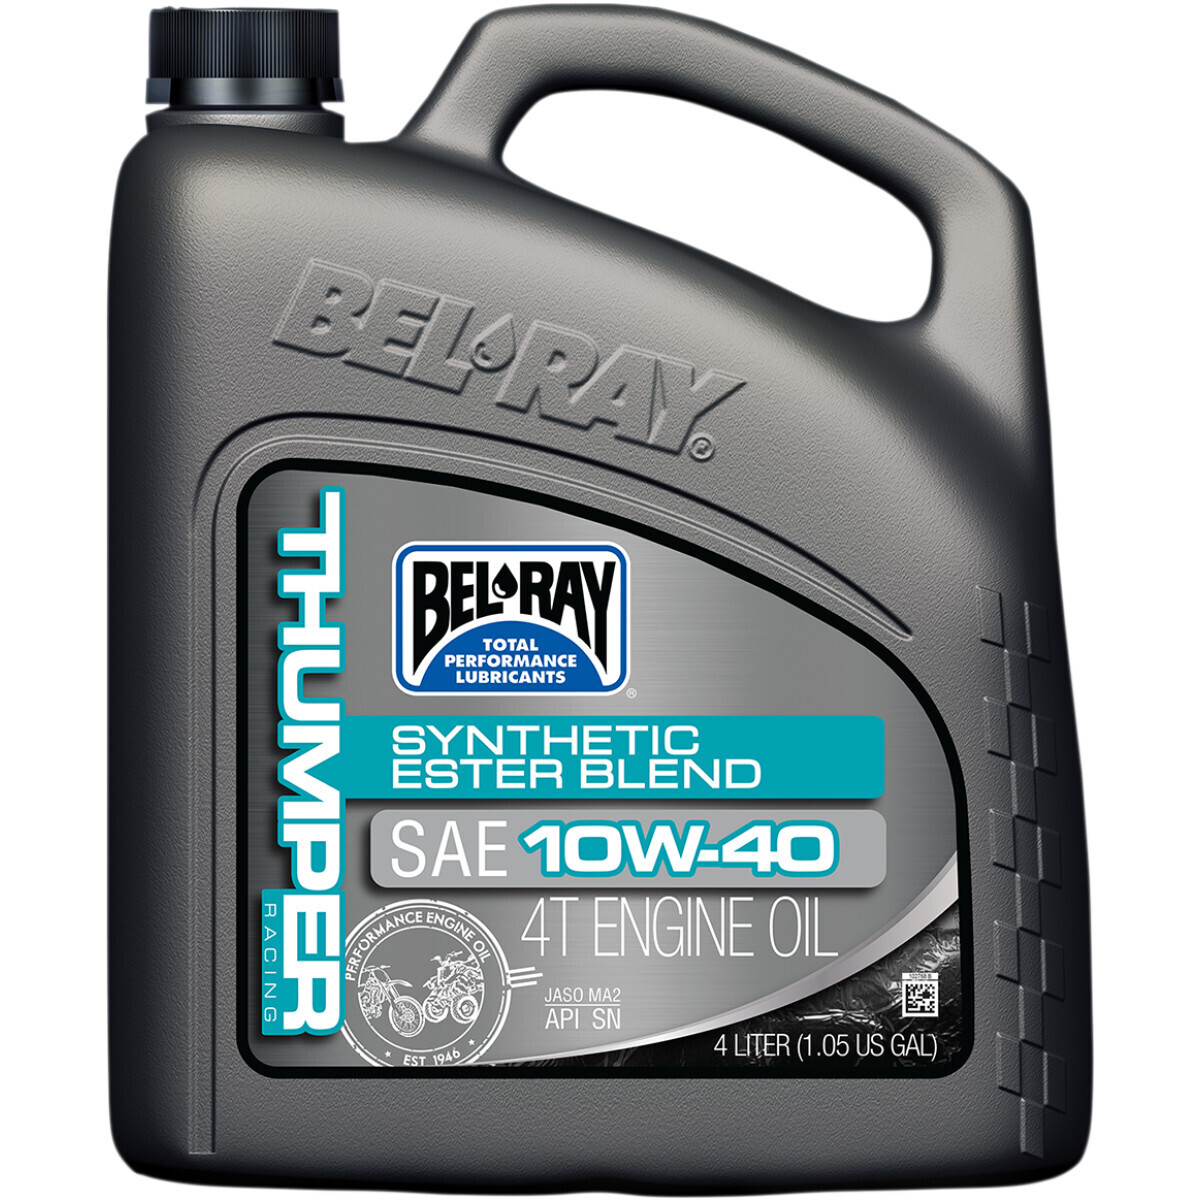 BEL-RAY
THUMPER RACING SYNTHETIC ESTER BLEND 4-STROKE ENGINE OIL 10W-40 4 LITER